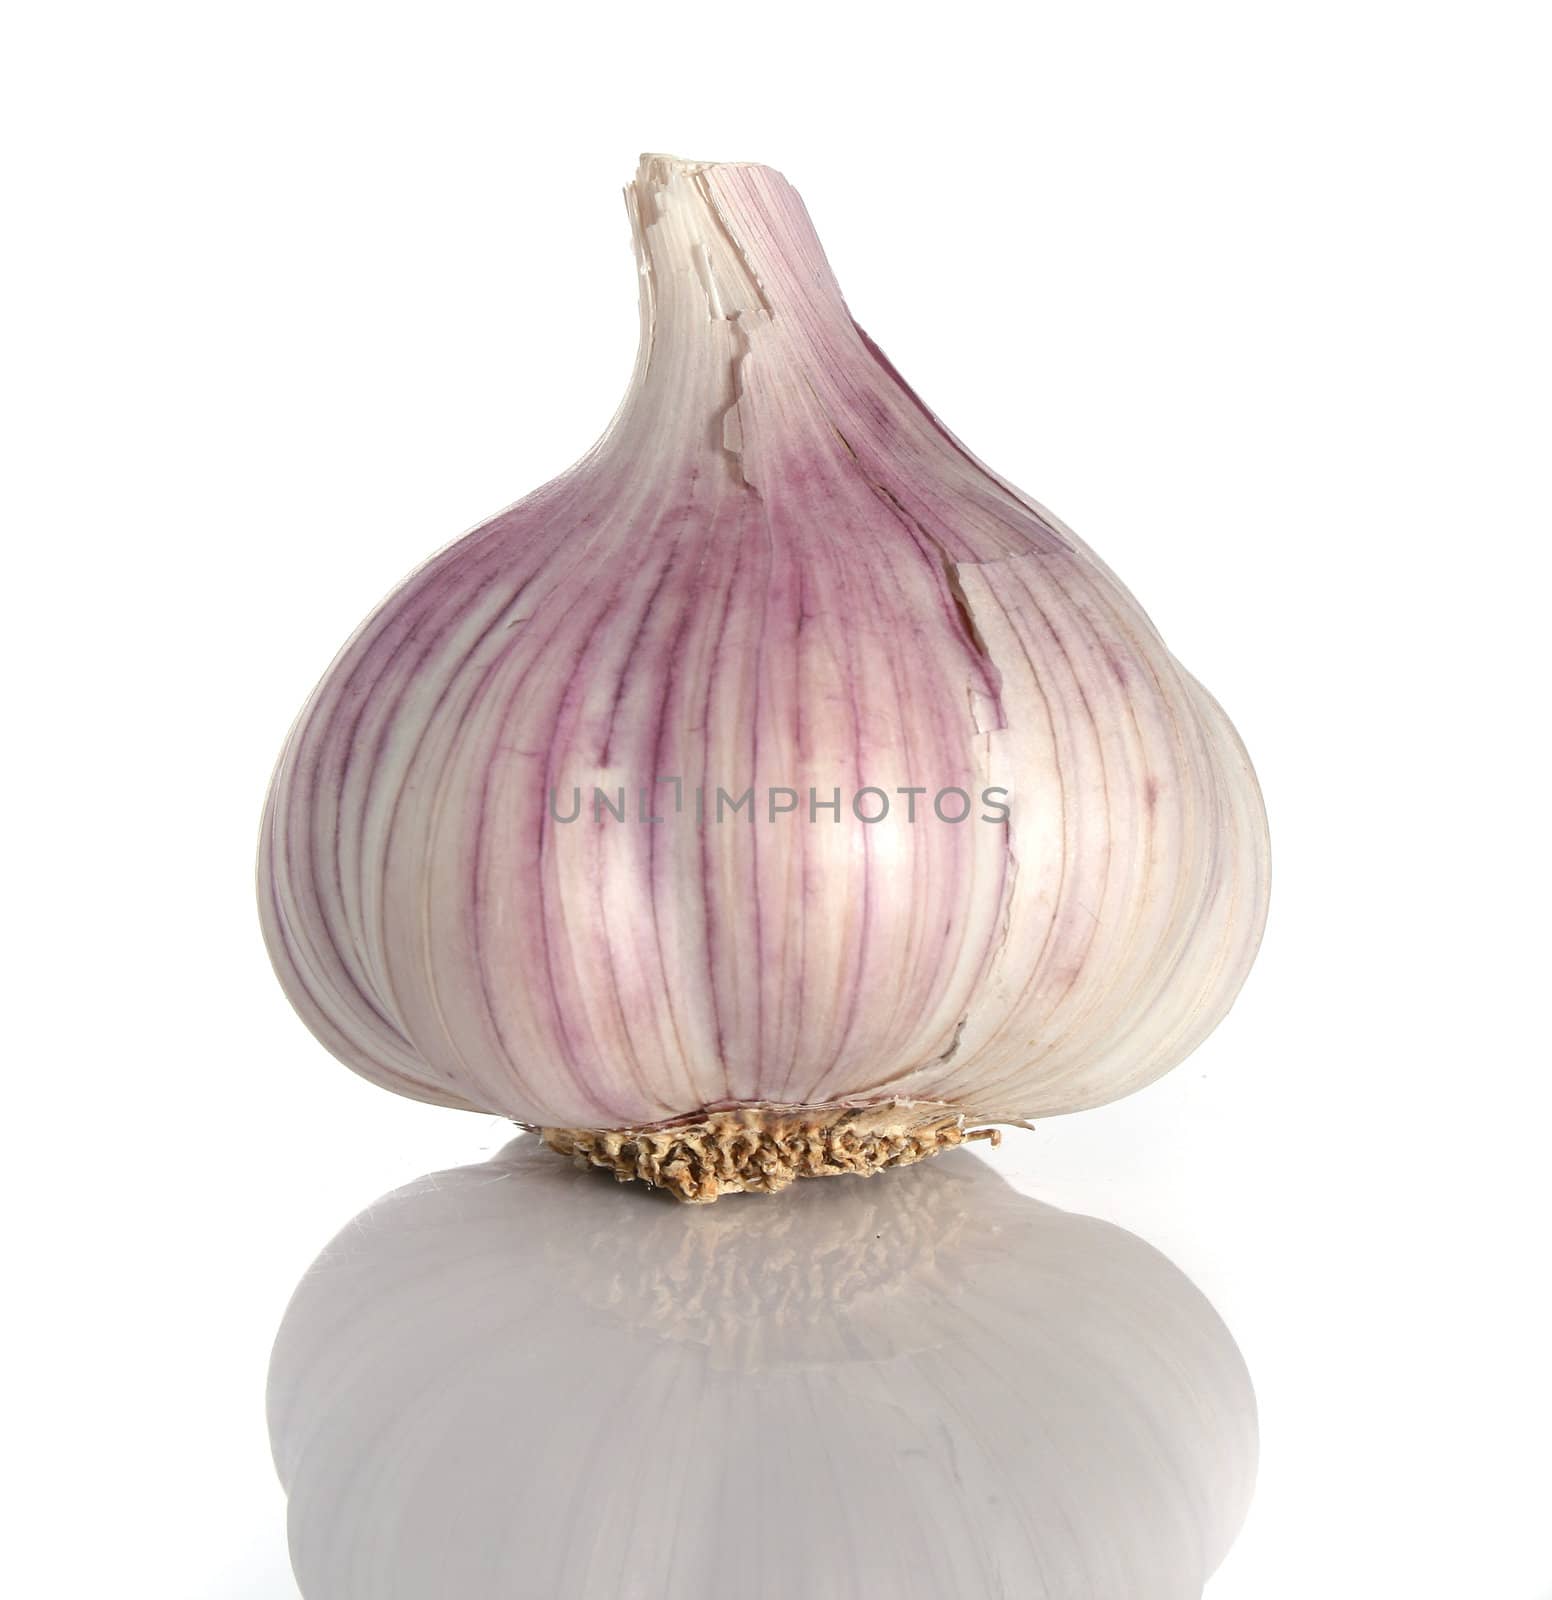 Garlic over a white background with reflection